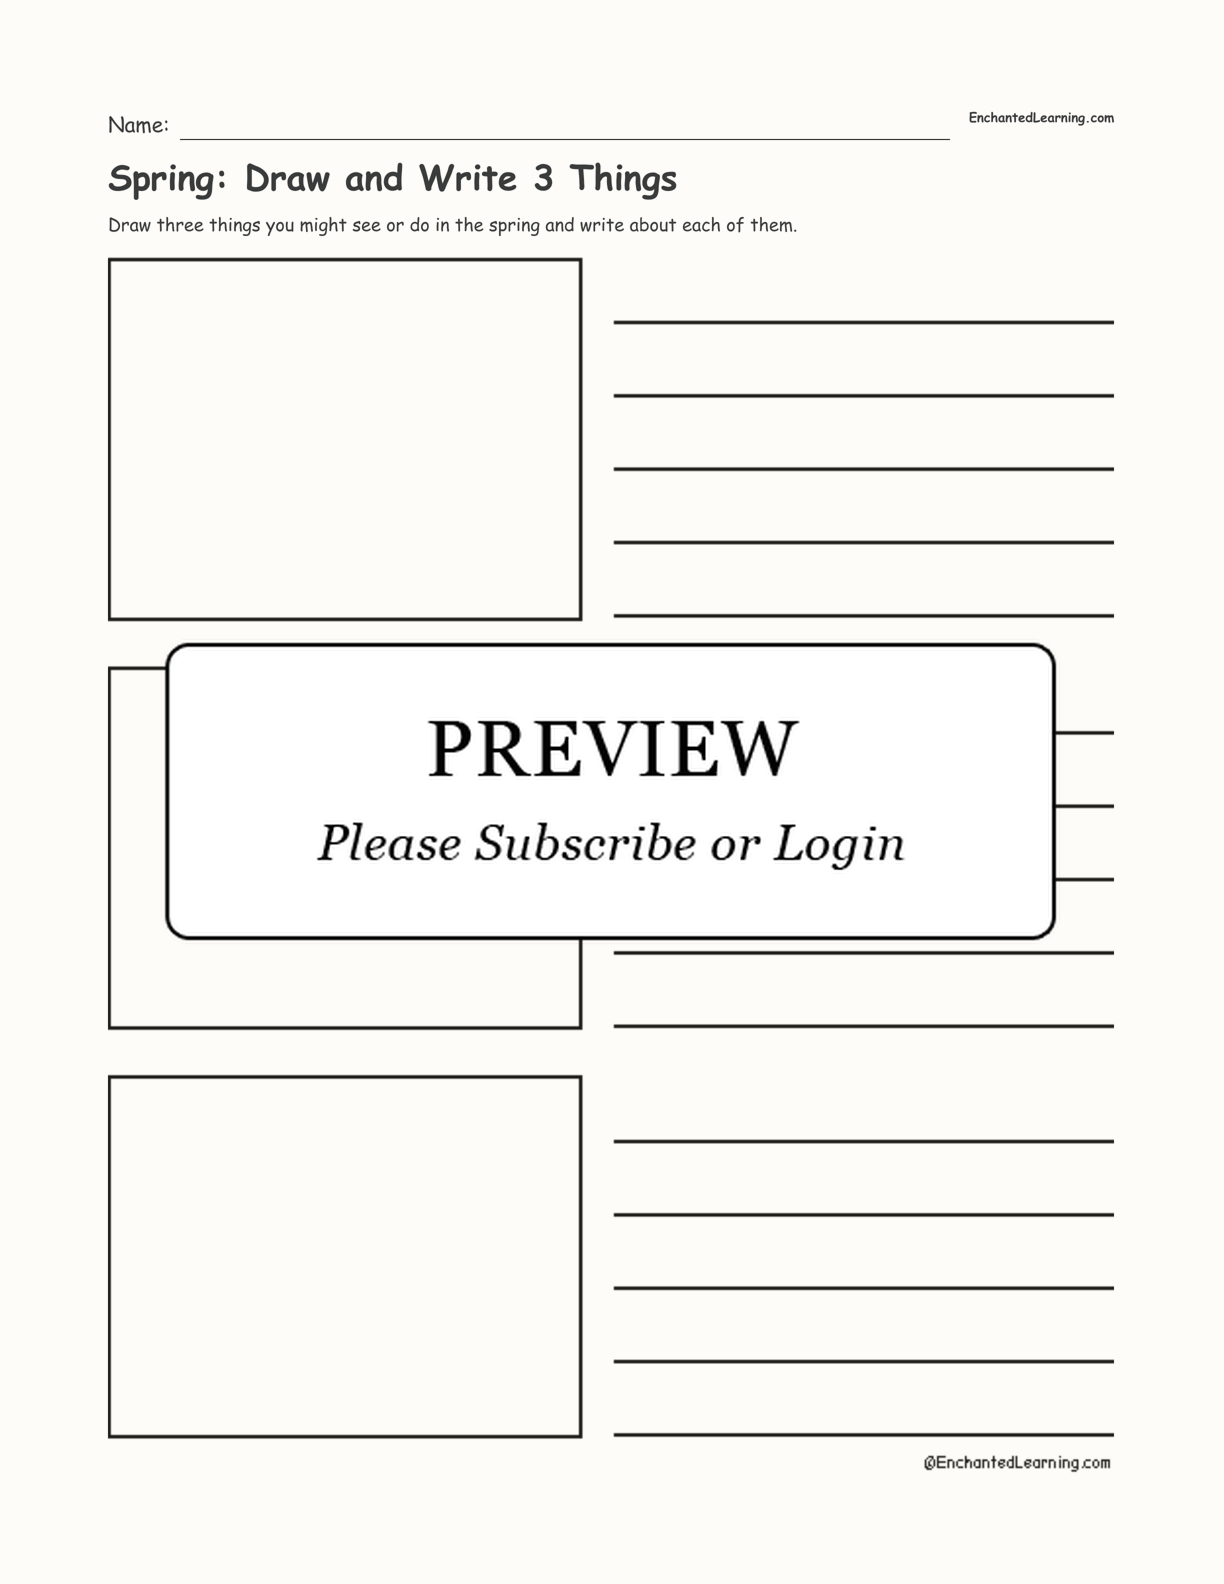 Spring: Draw and Write 3 Things interactive worksheet page 1